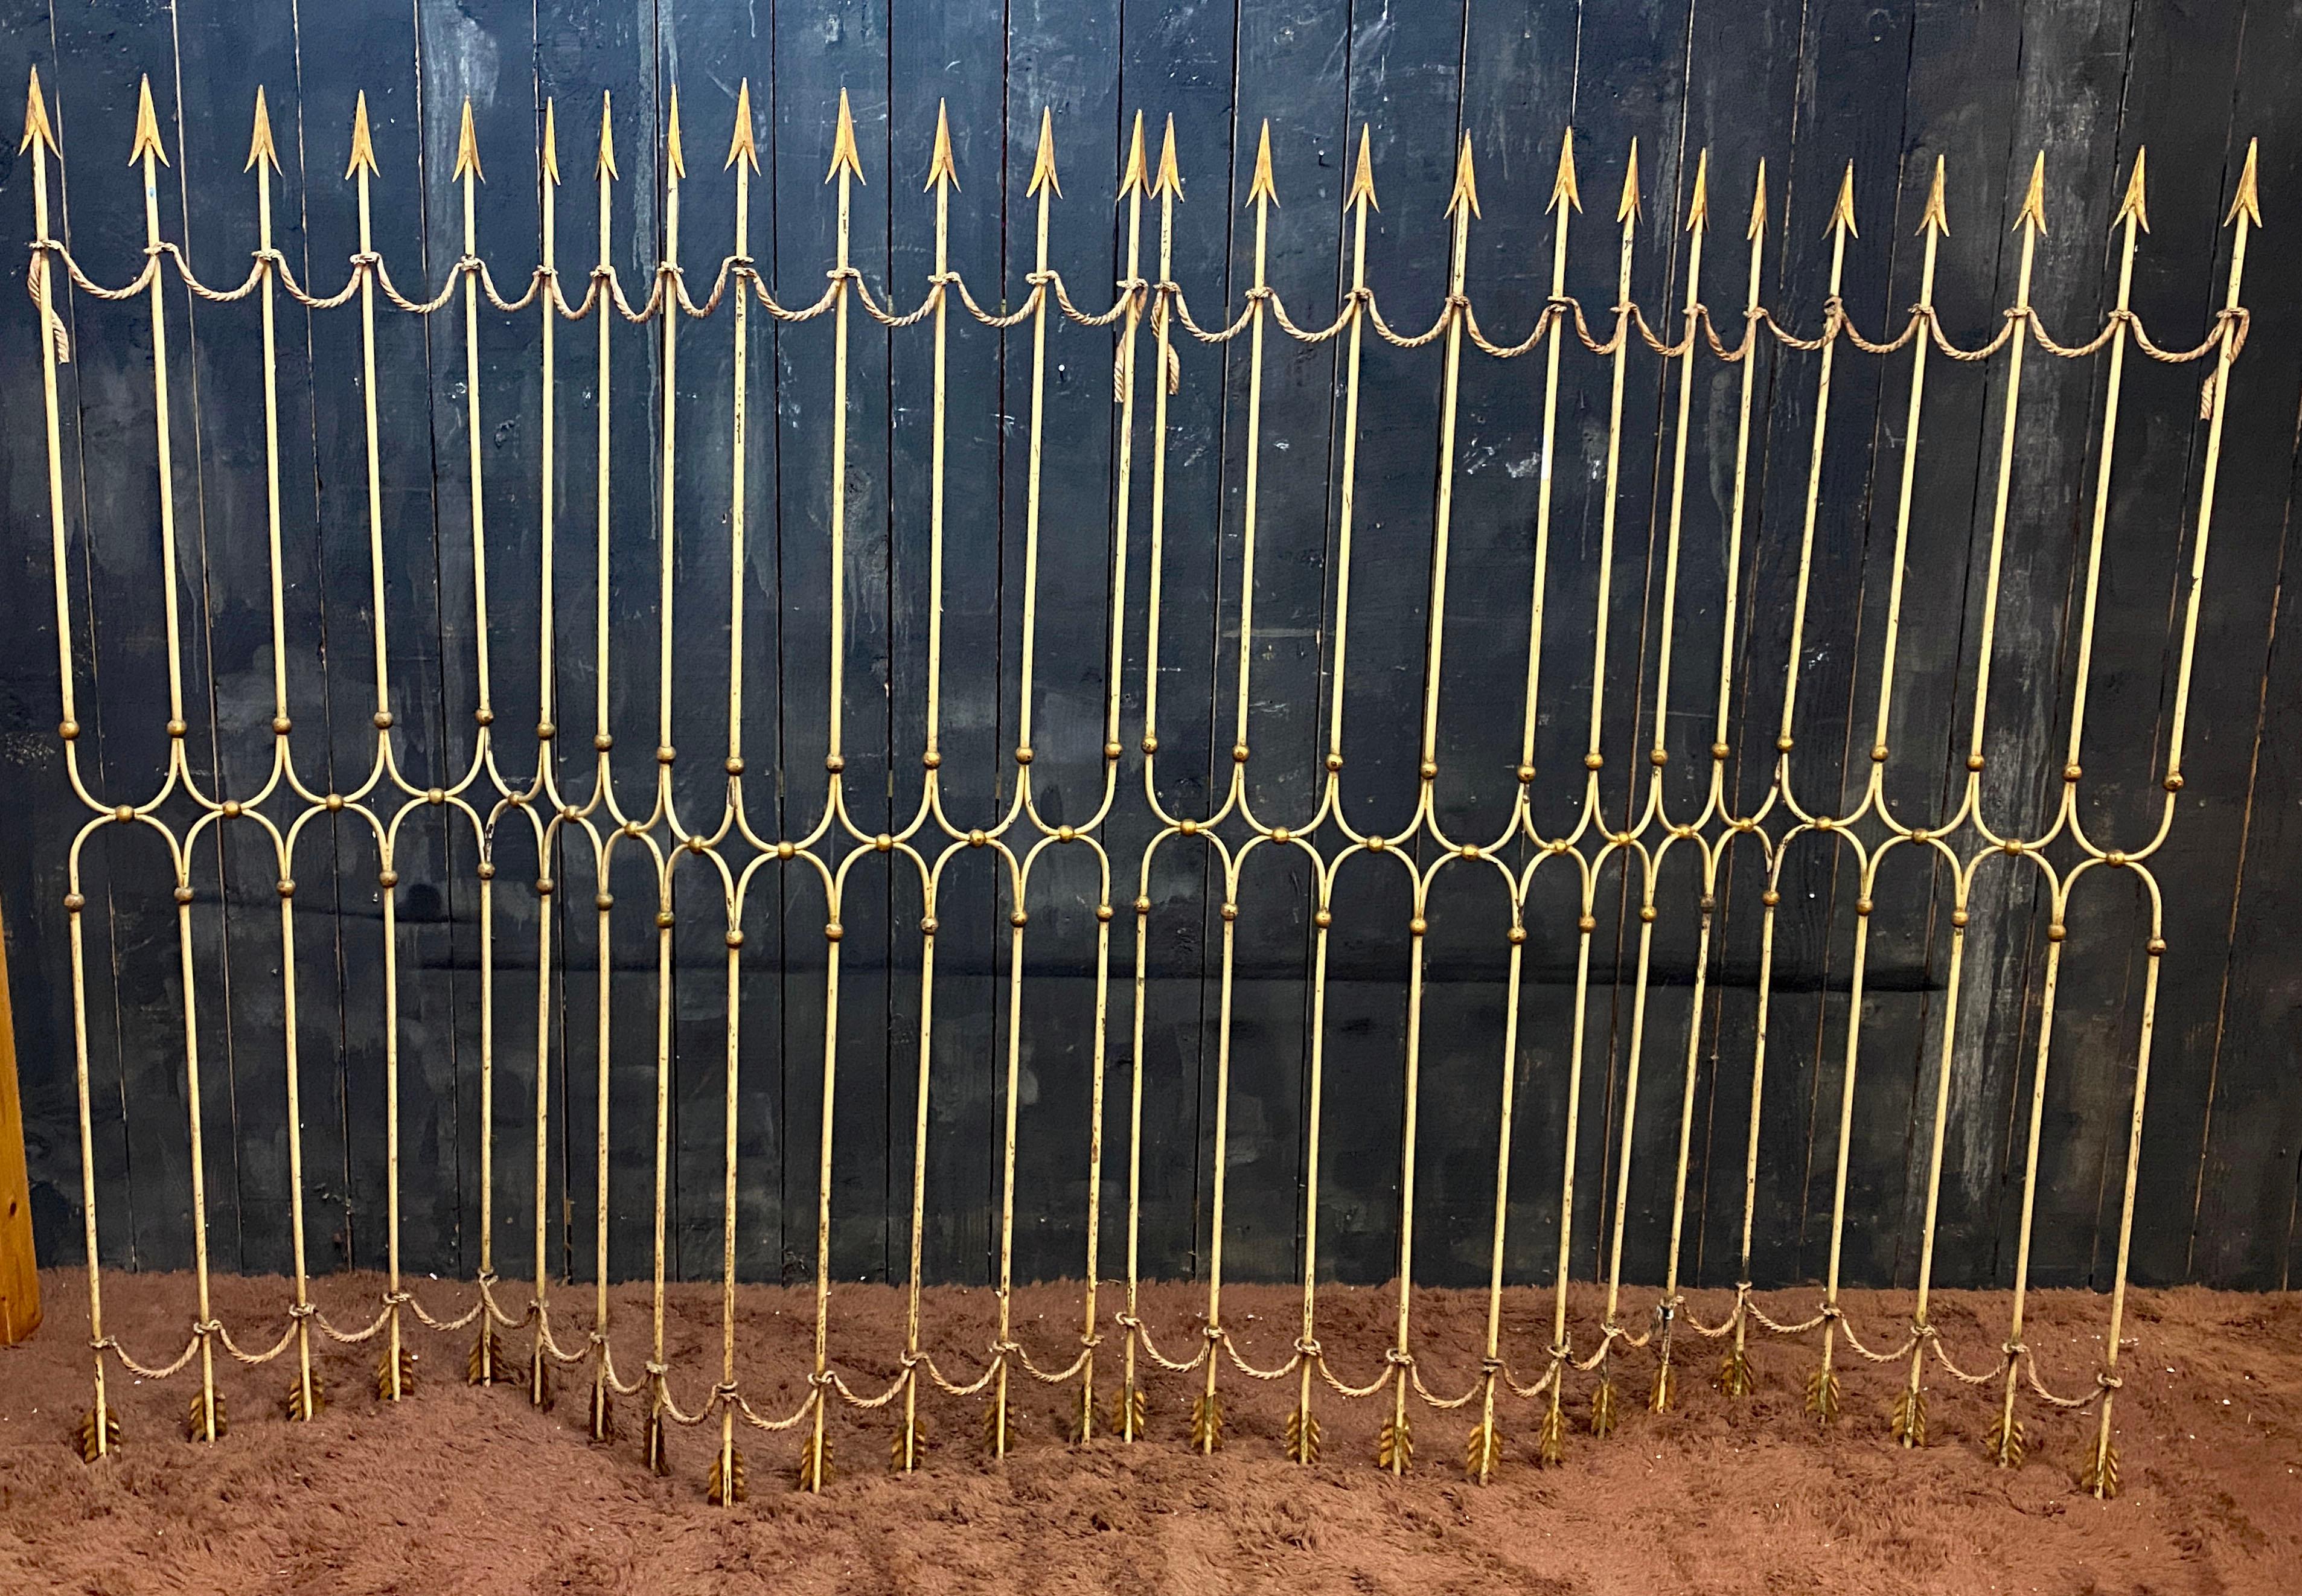 Two art deco room dividers, decorated with arrows and ropes in lacquered and gilded metal, circa 1940
Each roomm divide measures 63